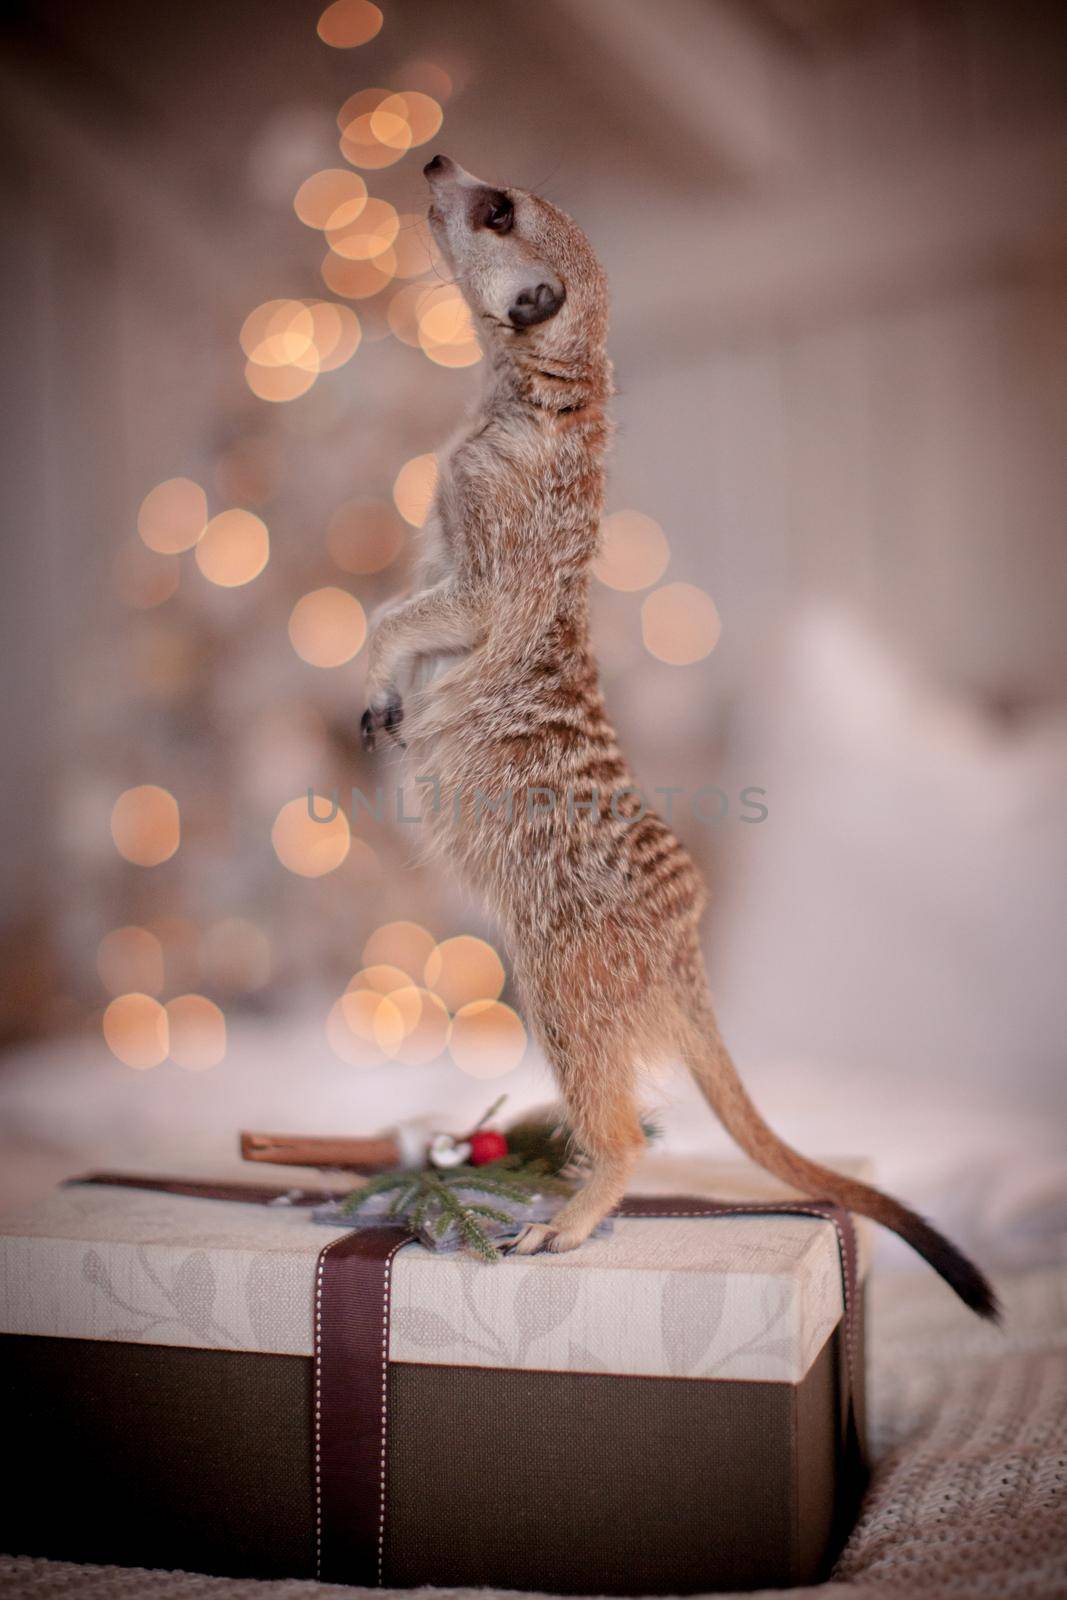 The meerkat or suricate cub in decorated room with Christmass tree. by RosaJay